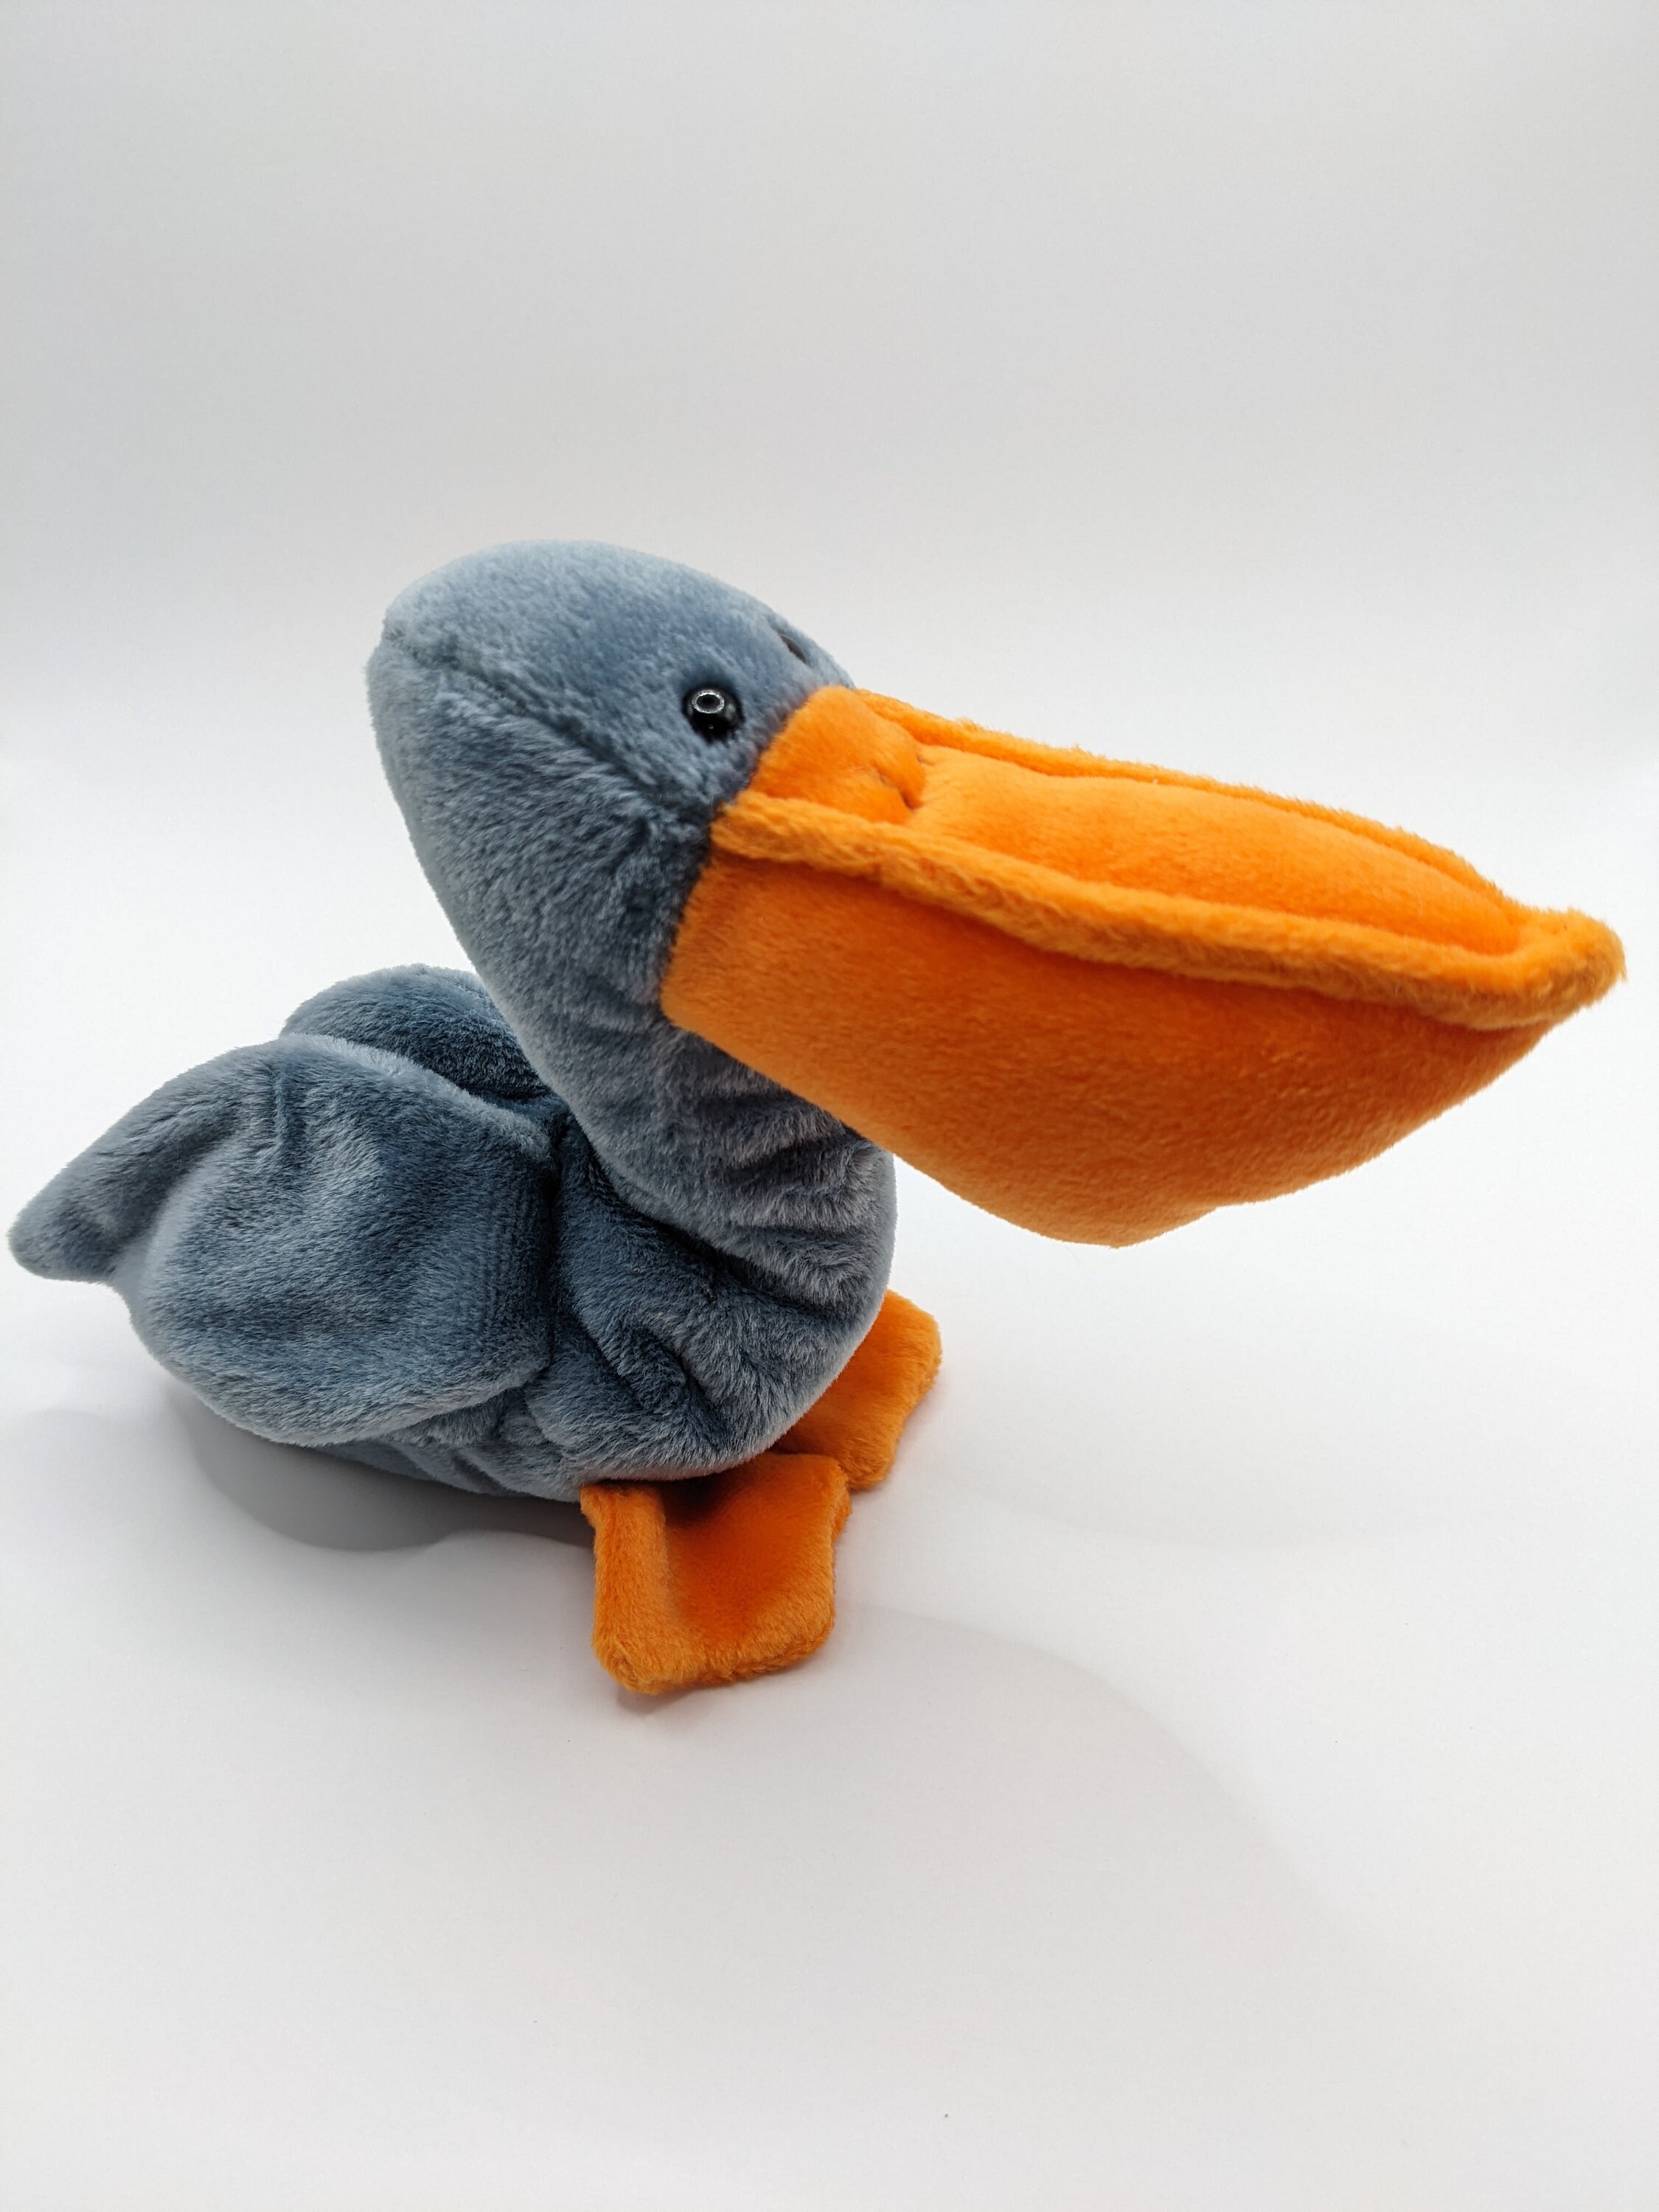 Scoop the Pelican for sale online Ty 4107 Beanie Babies 